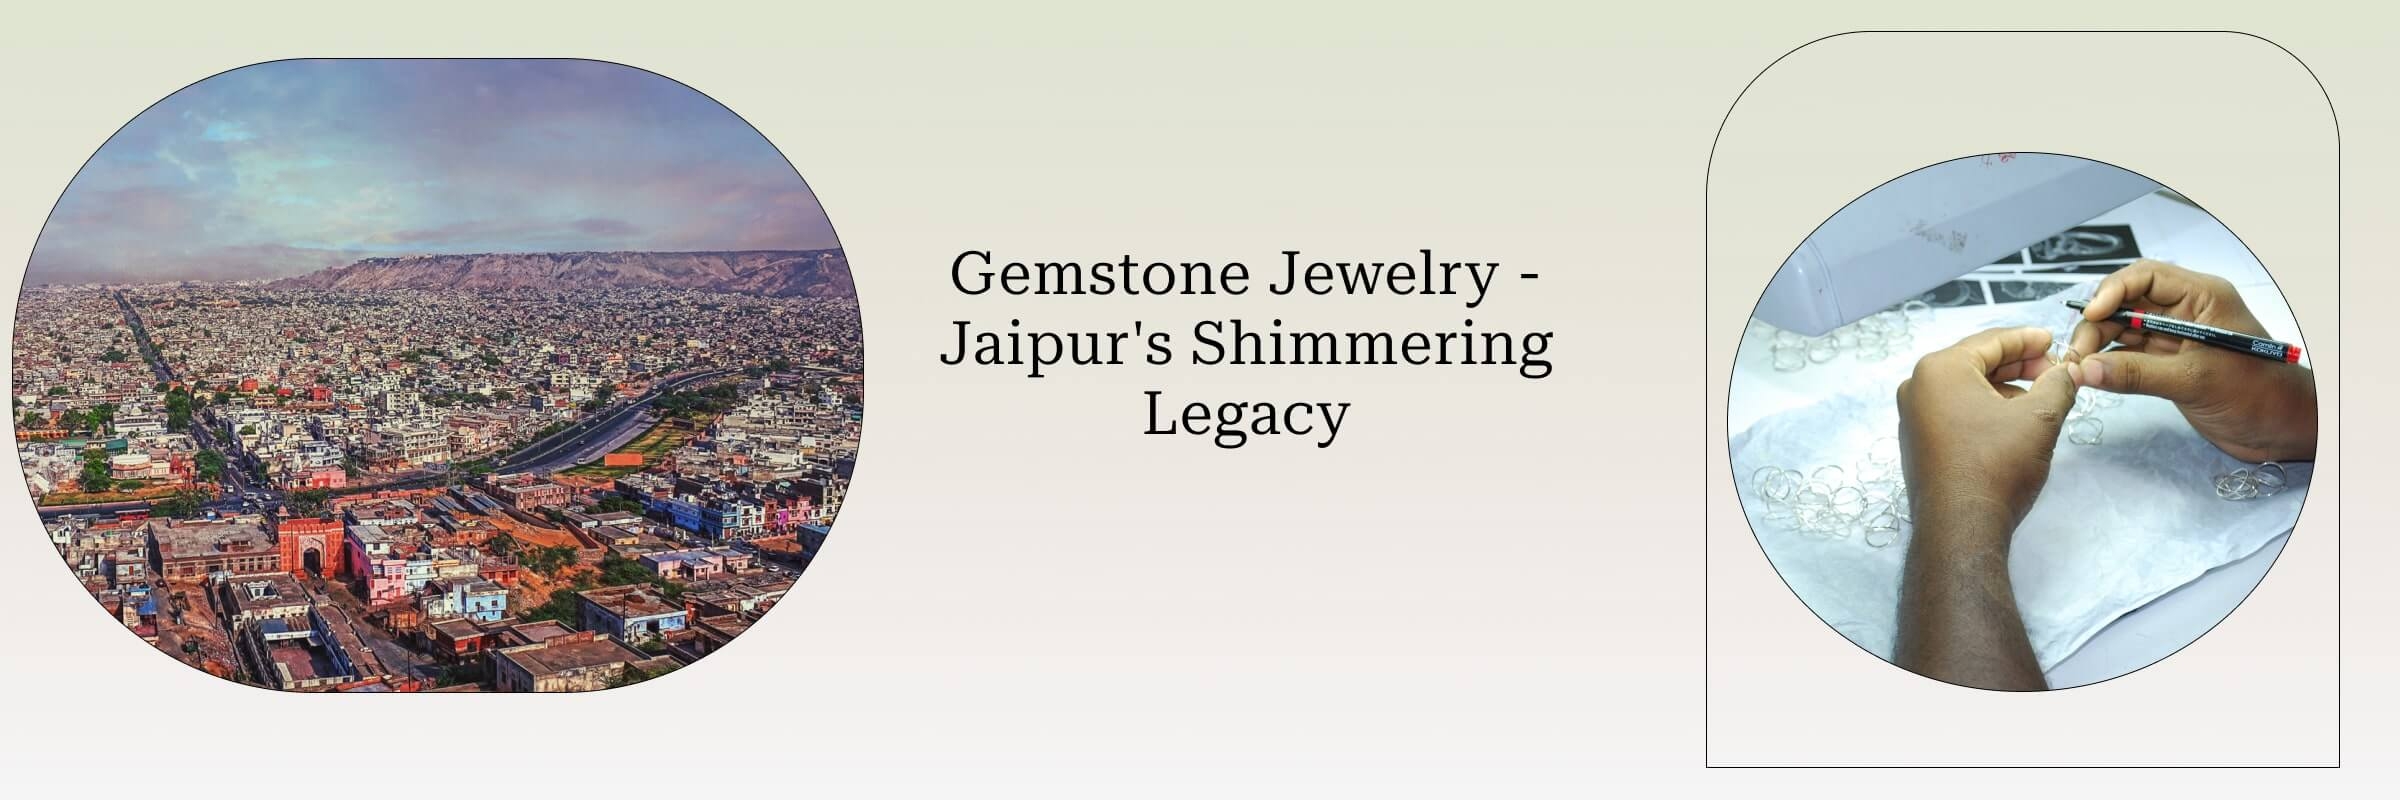 Reasons to Purchase Gemstone Jewelry from Jaipur